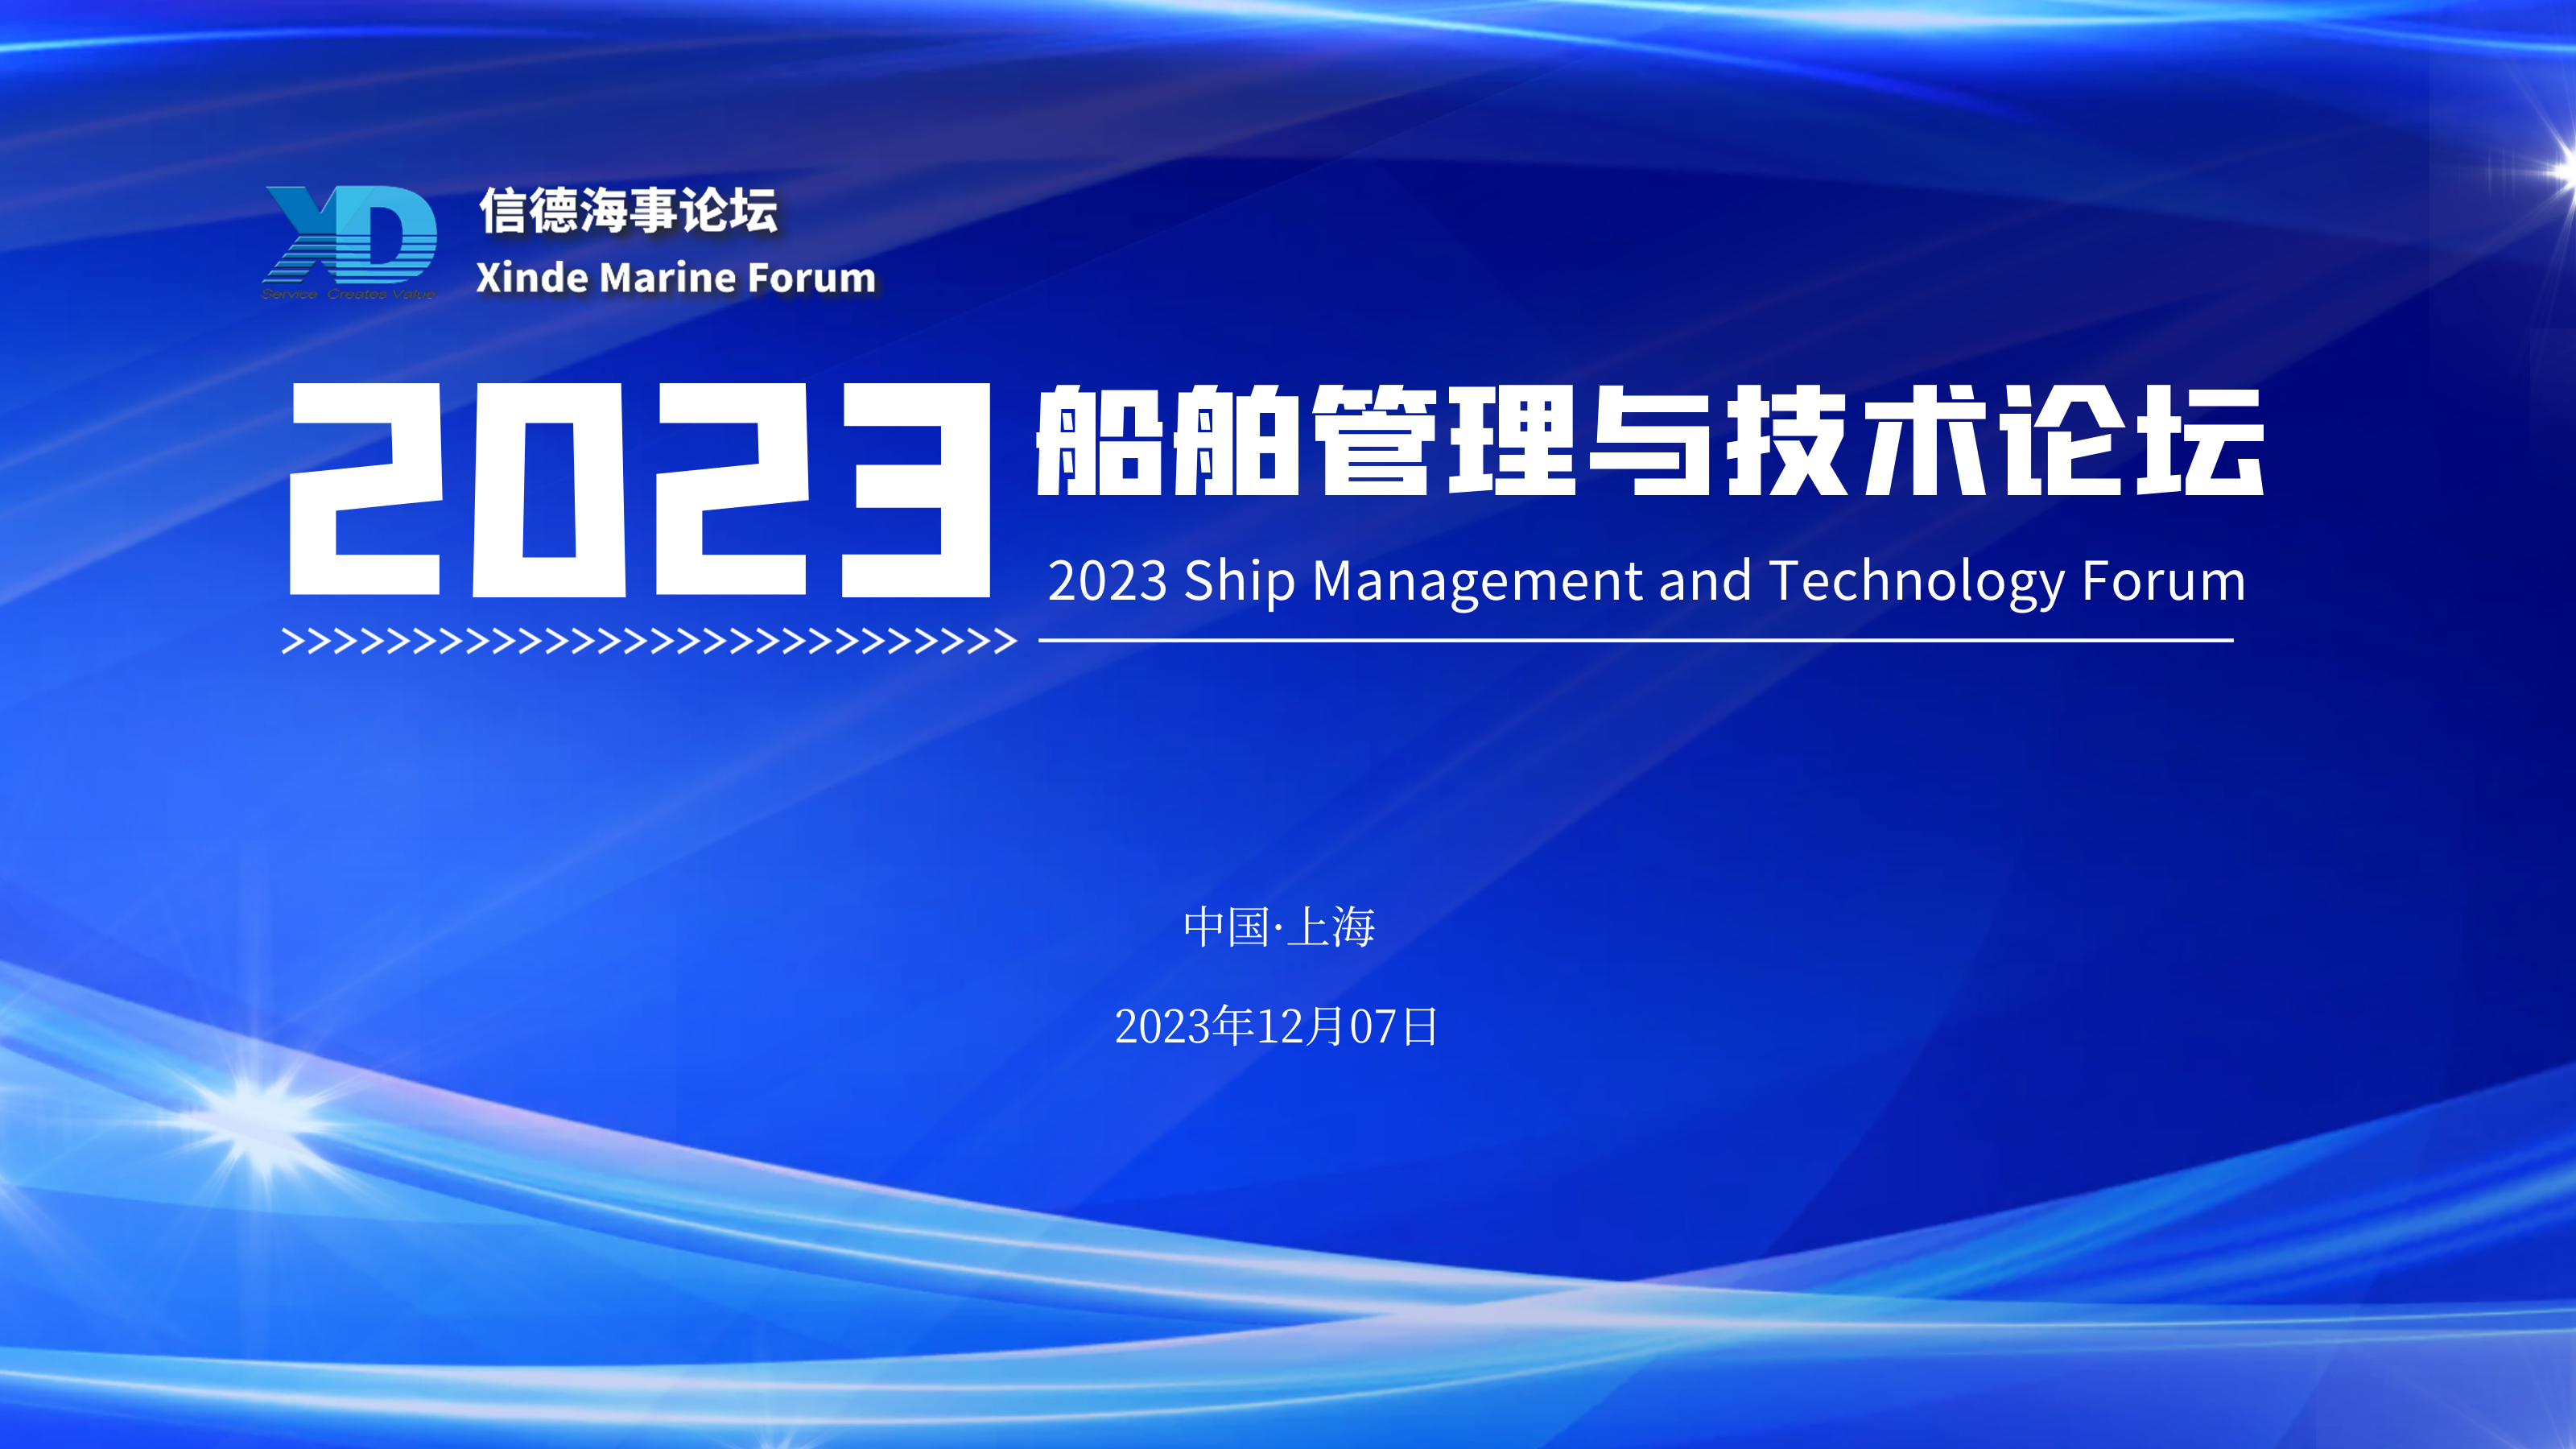 Xinde Marine Forum：2023 Ship Management and Techn